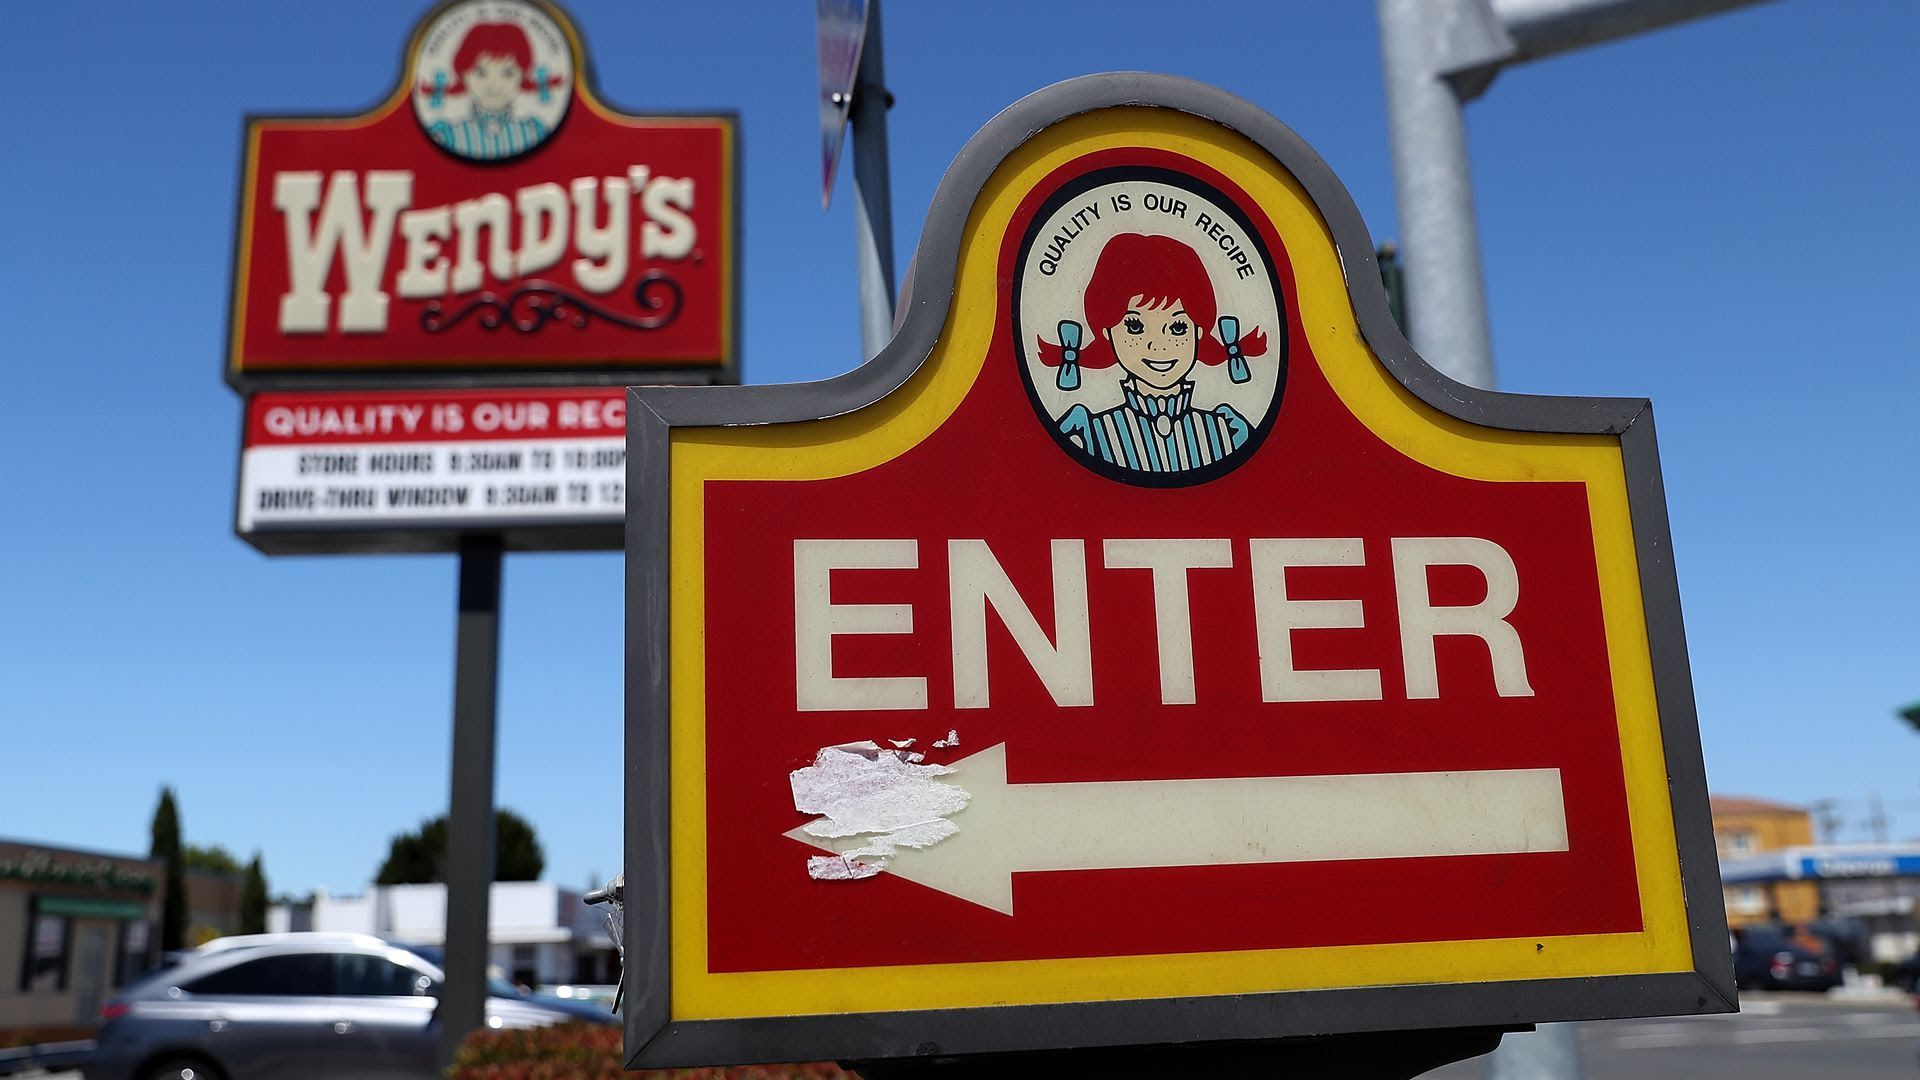 Photo of a Wendy's sign that says "ENTER" with an arrow